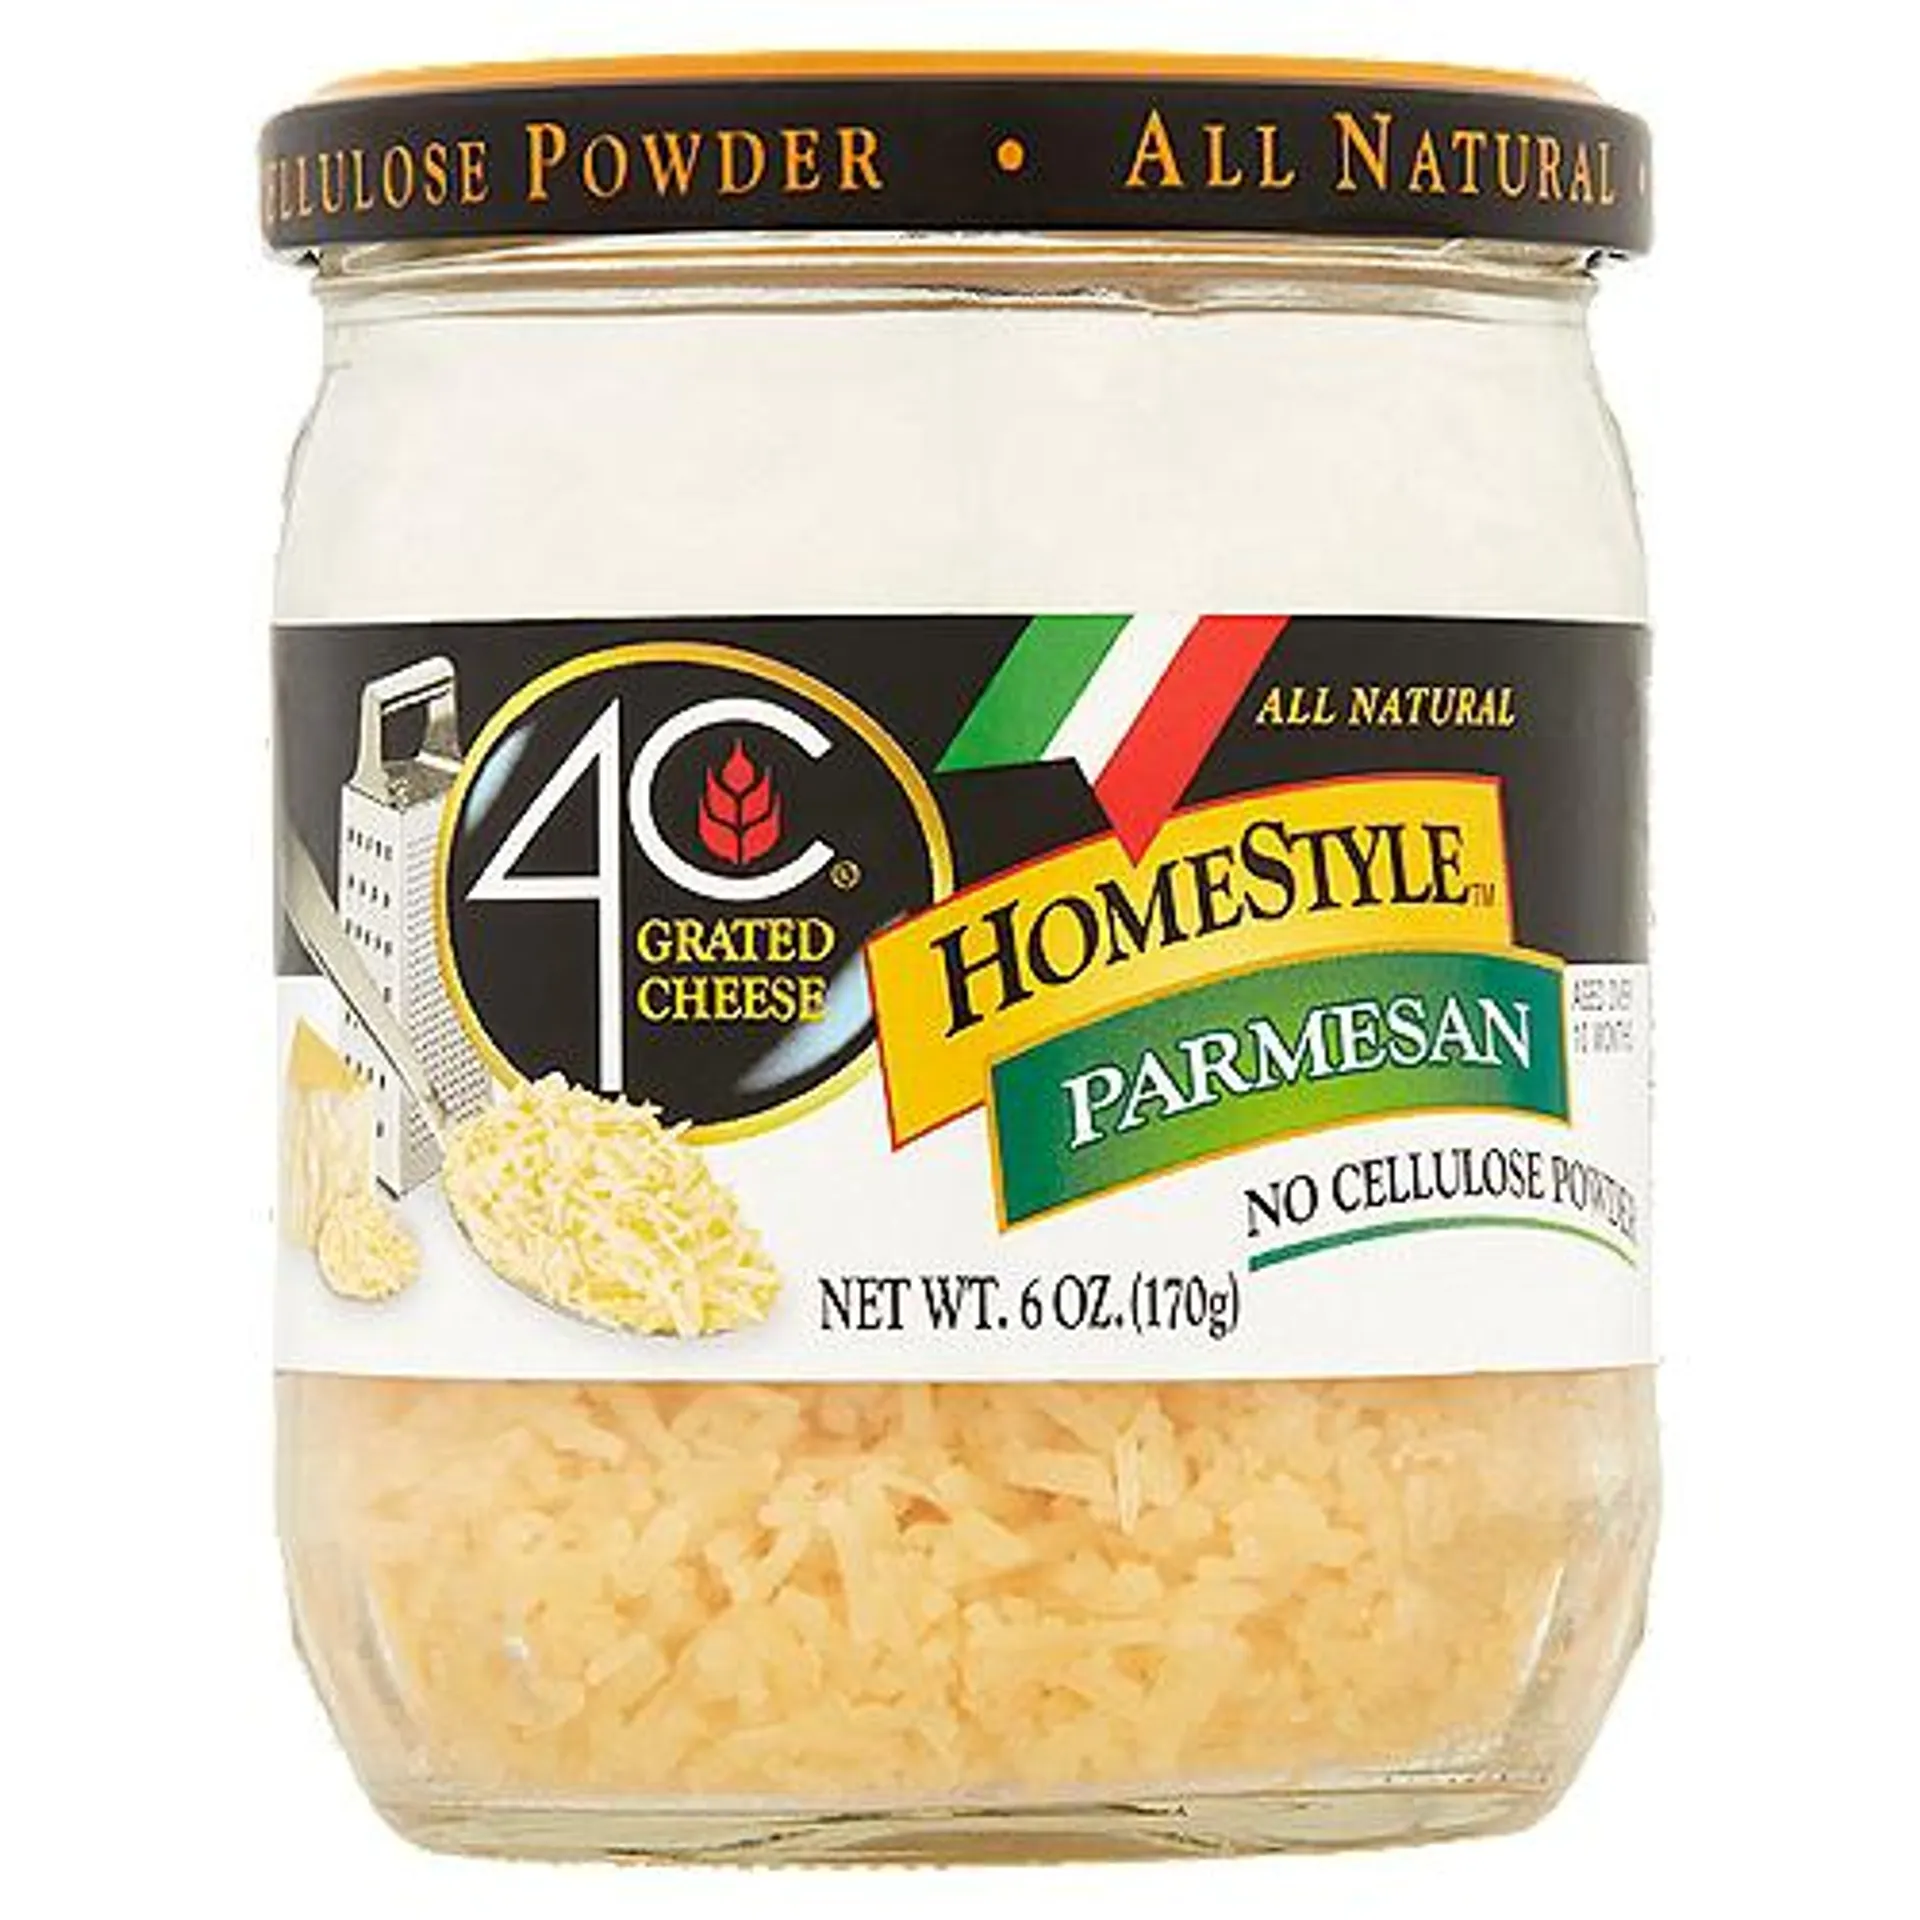 4C HomeStyle Parmesan, Grated Cheese, 6 Ounce